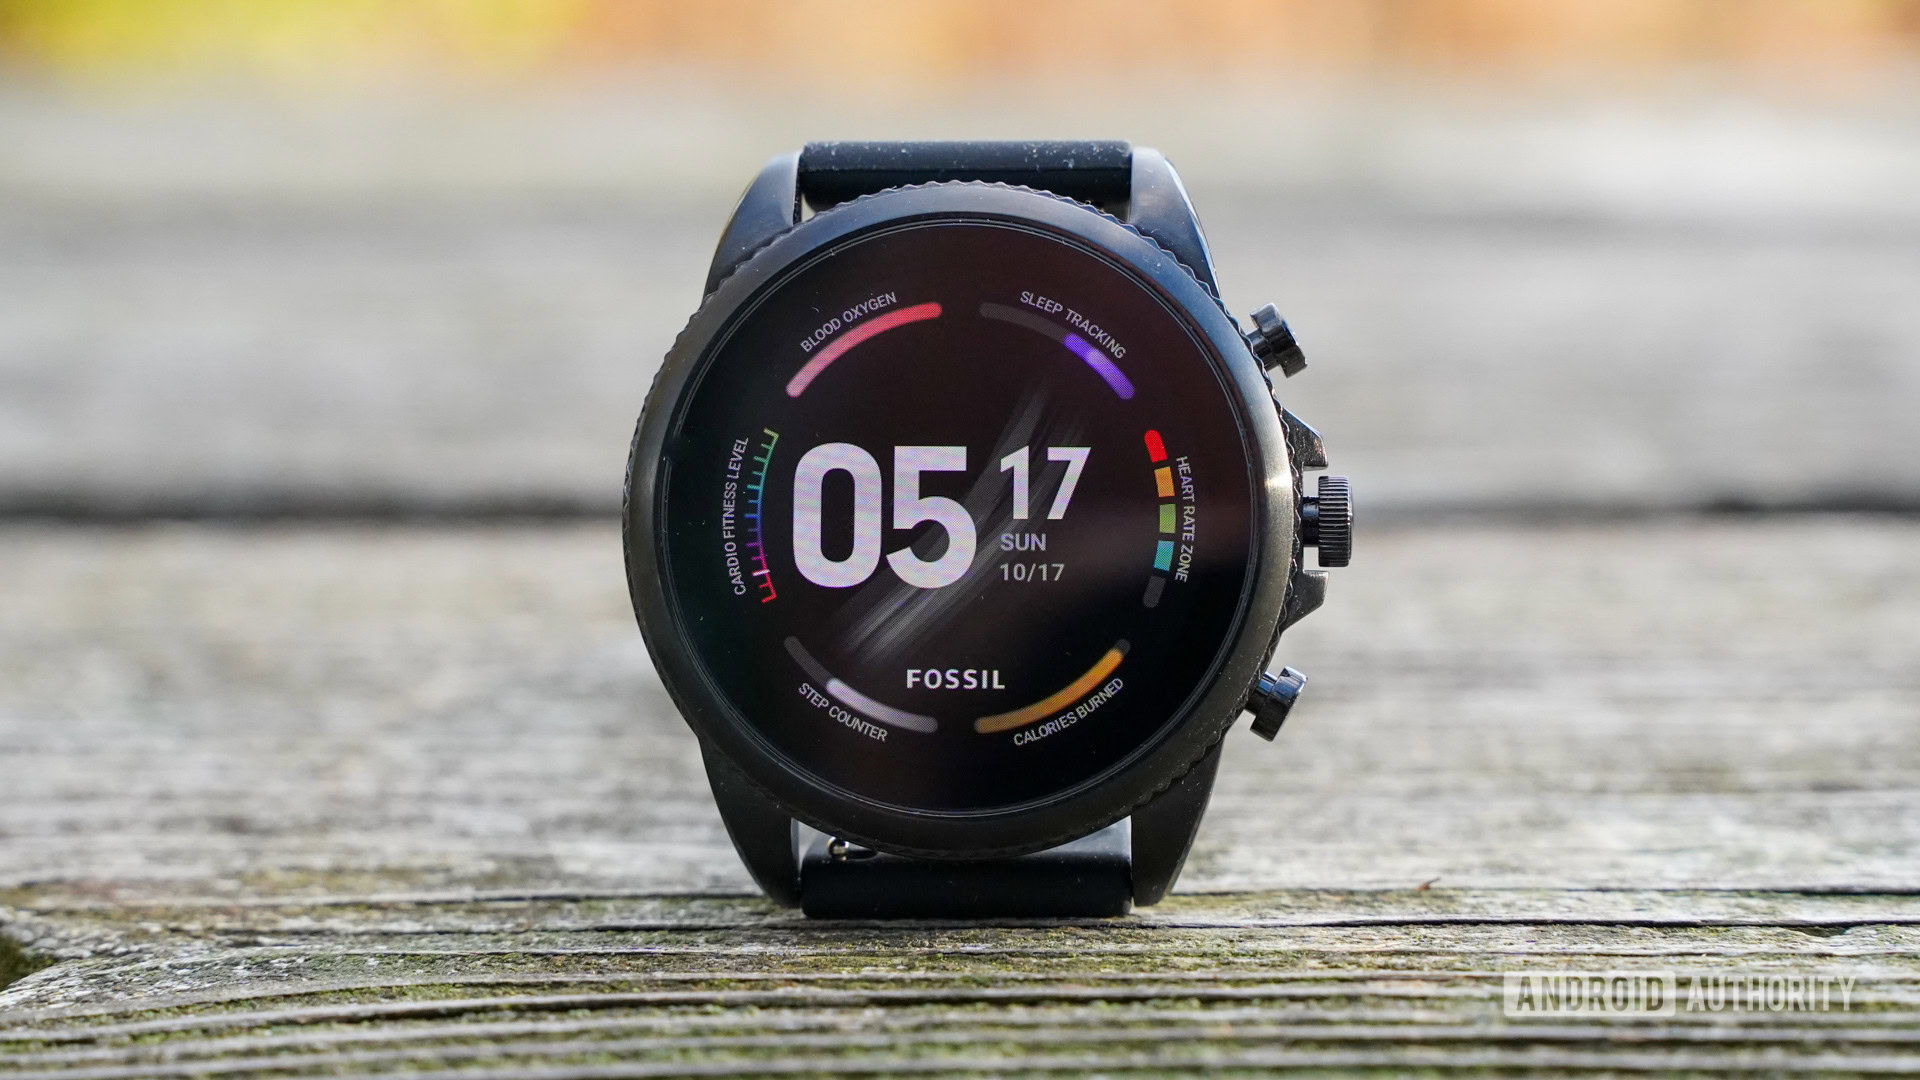 Fossil Gen 6 smartwatches guide: What you need to know